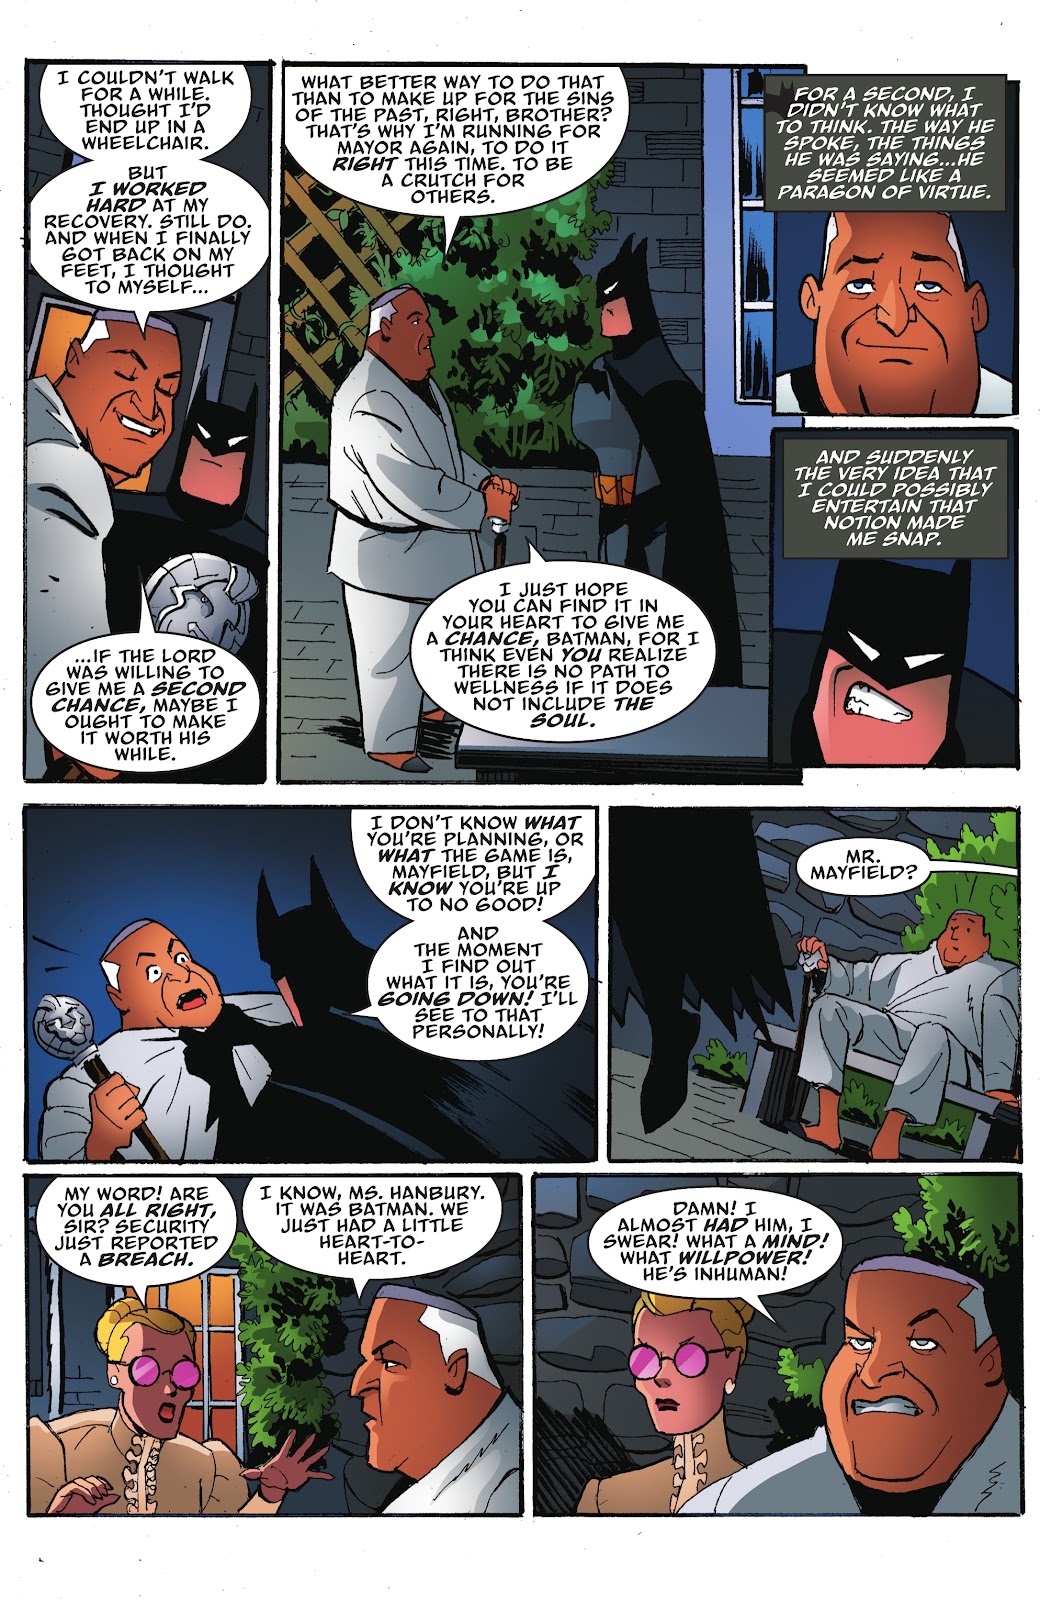 Batman: The Adventures Continue: Season Two issue 6 - Page 7